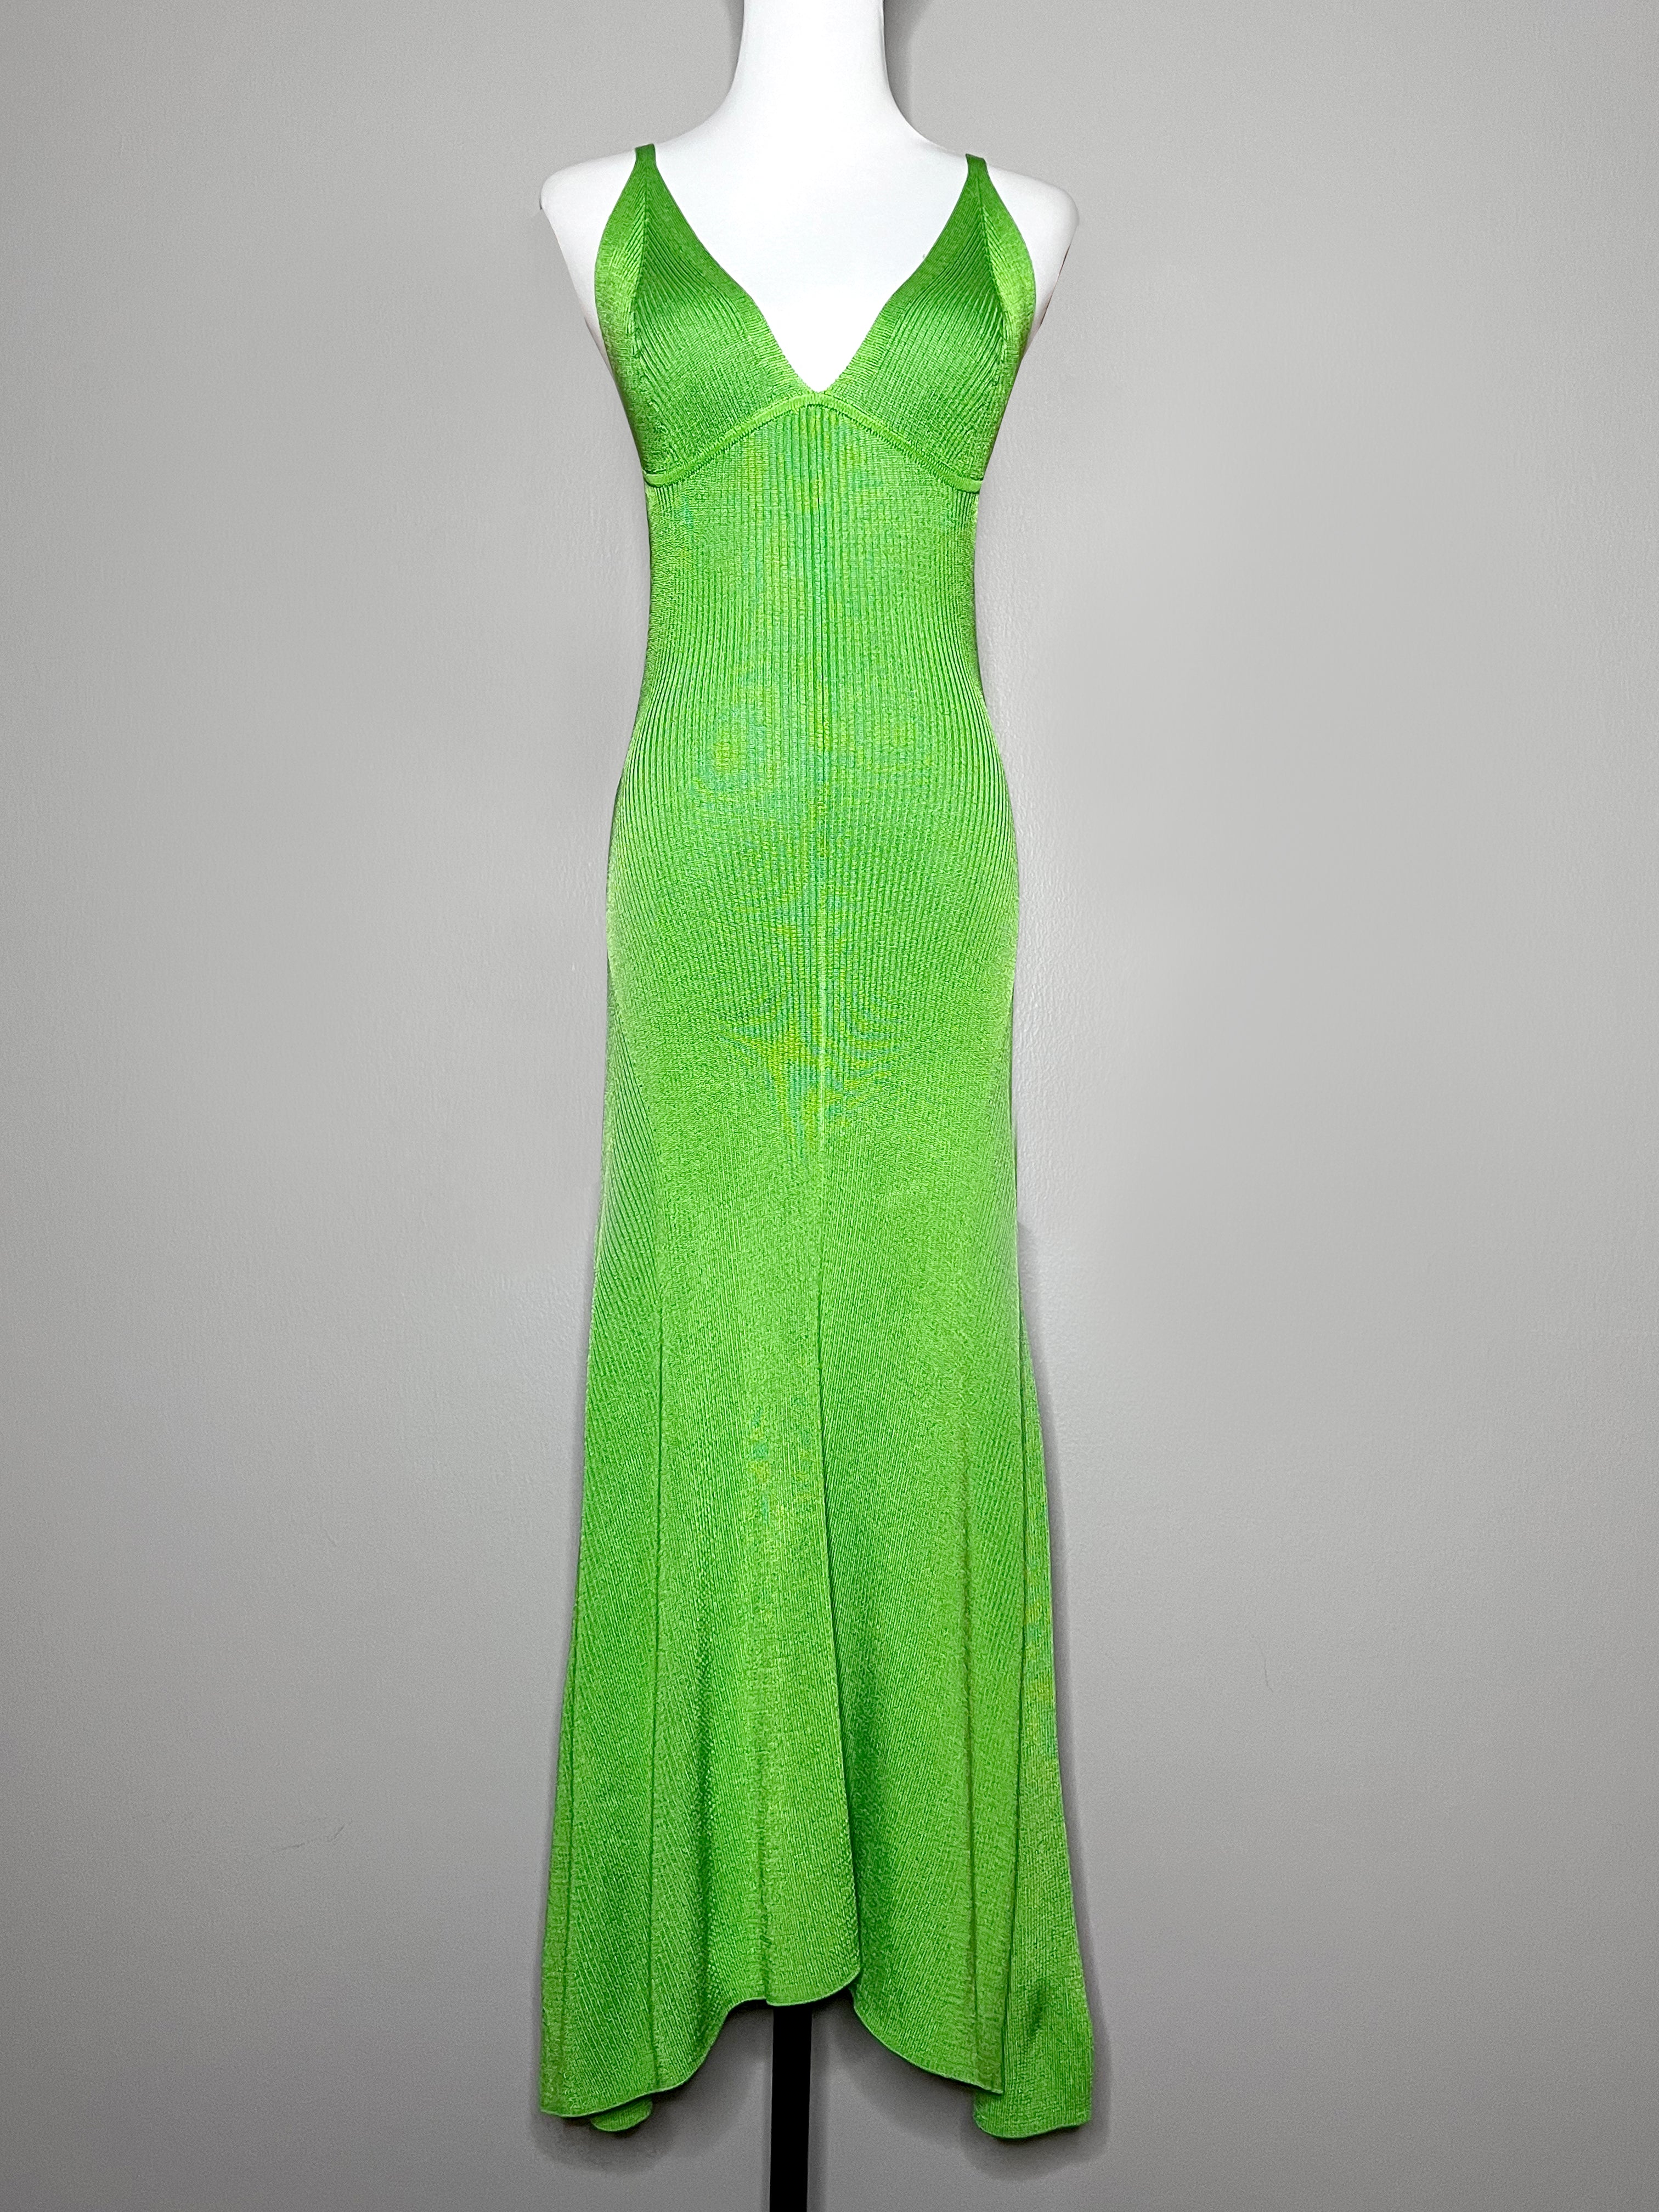 BRAND NEW !! Green spaghetti strap long knitted dress - Tommy Hilfiger